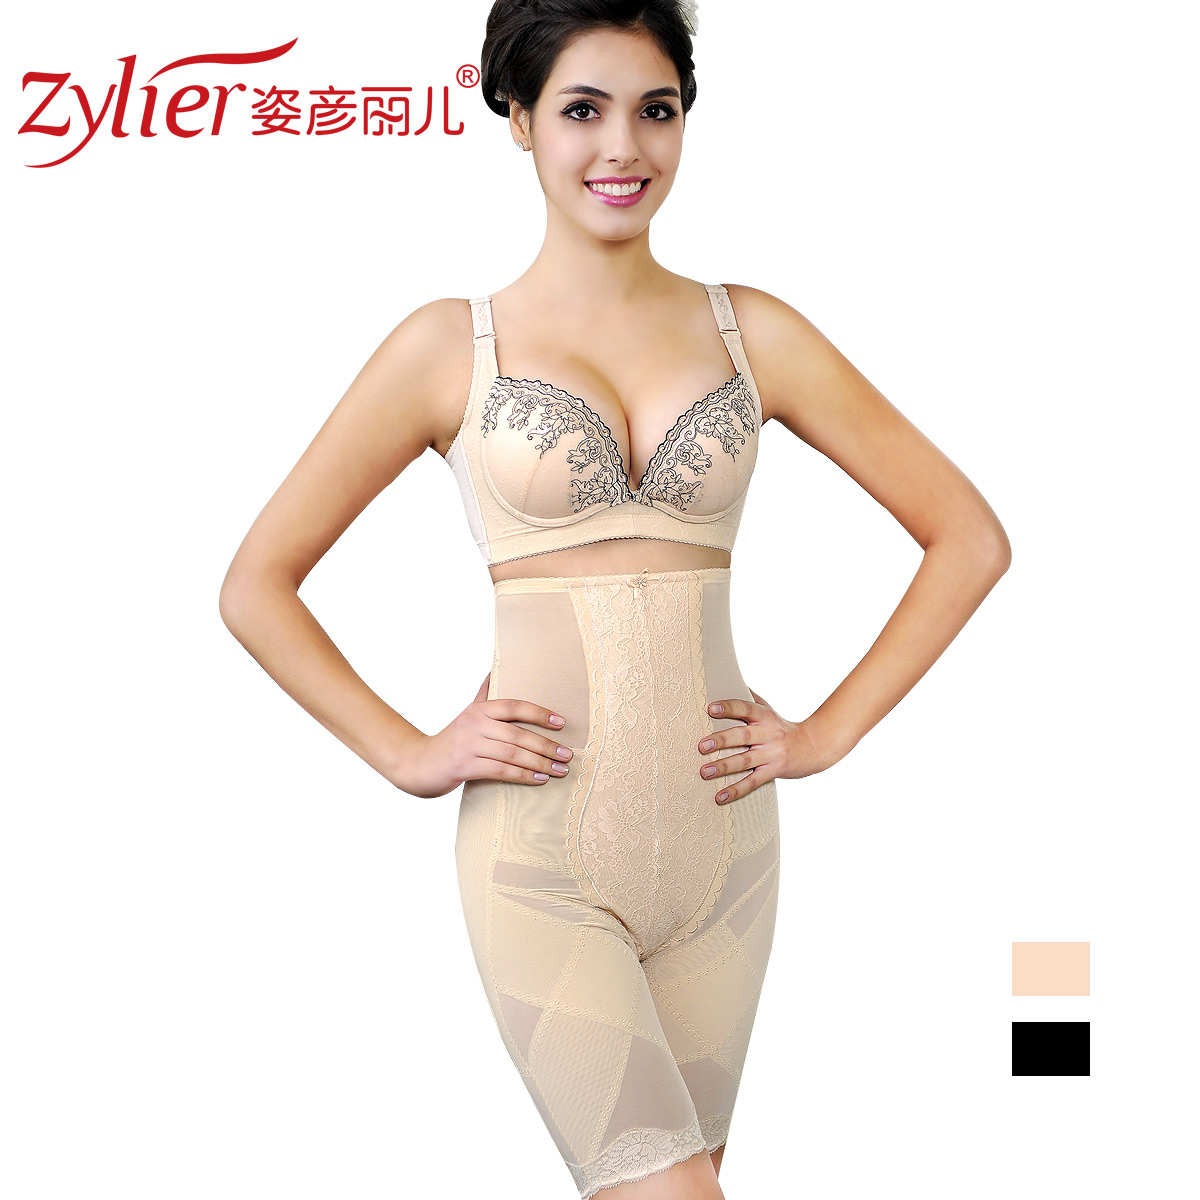 Peerlessly beautiful evening high waist abdomen drawing pants butt-lifting pants solid color body shaping panties sk80